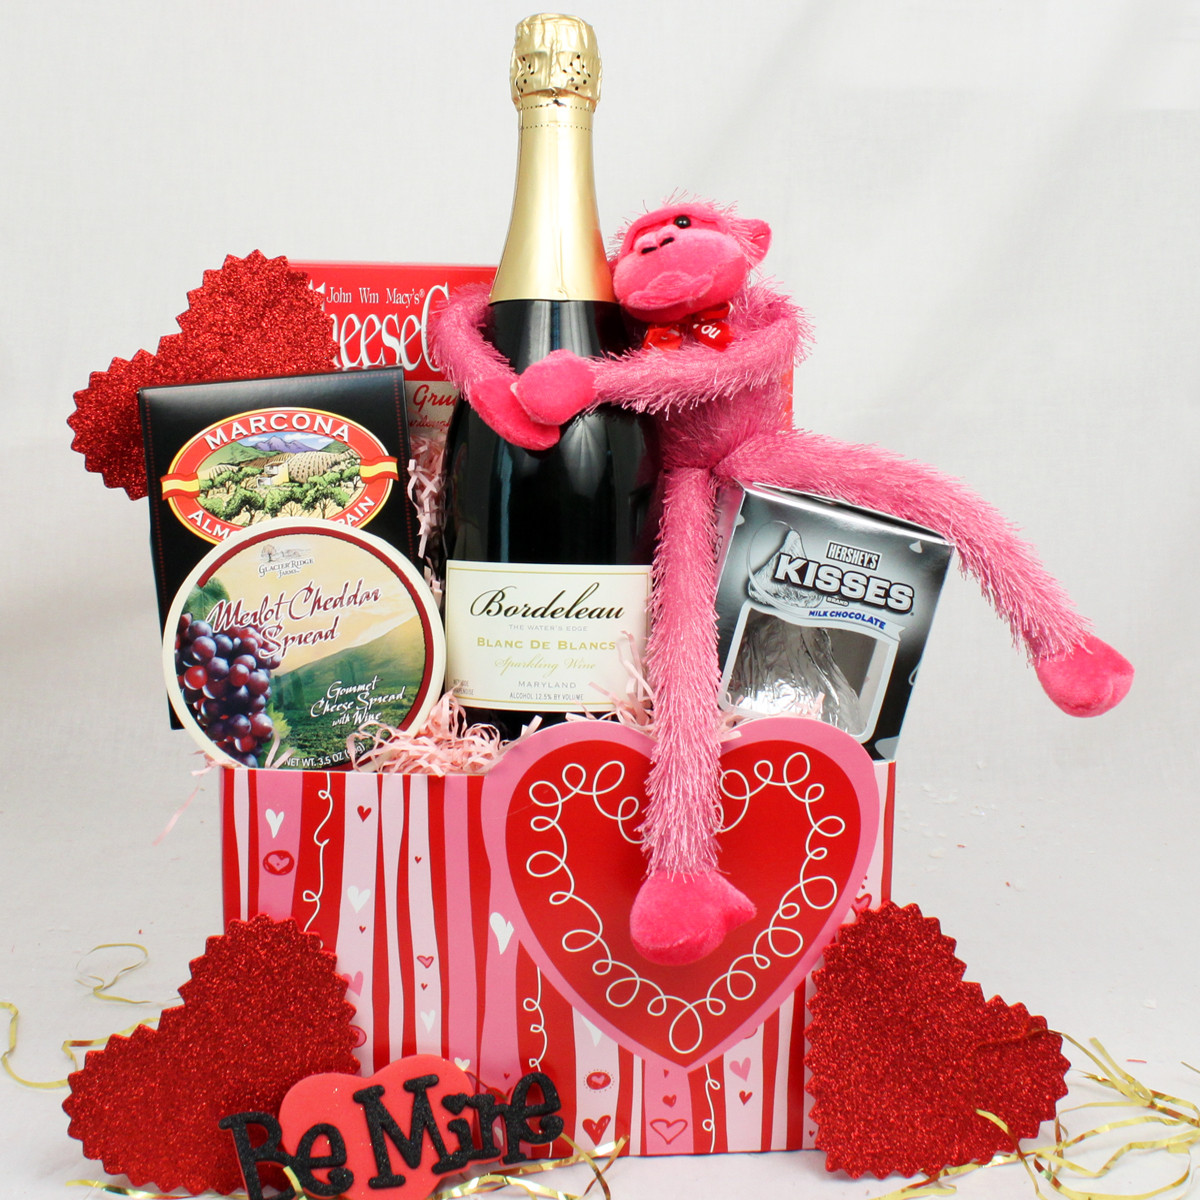 Creative Valentines Gift Ideas For Him
 Creative and Thoughtful Valentine’s Day Gifts for Her